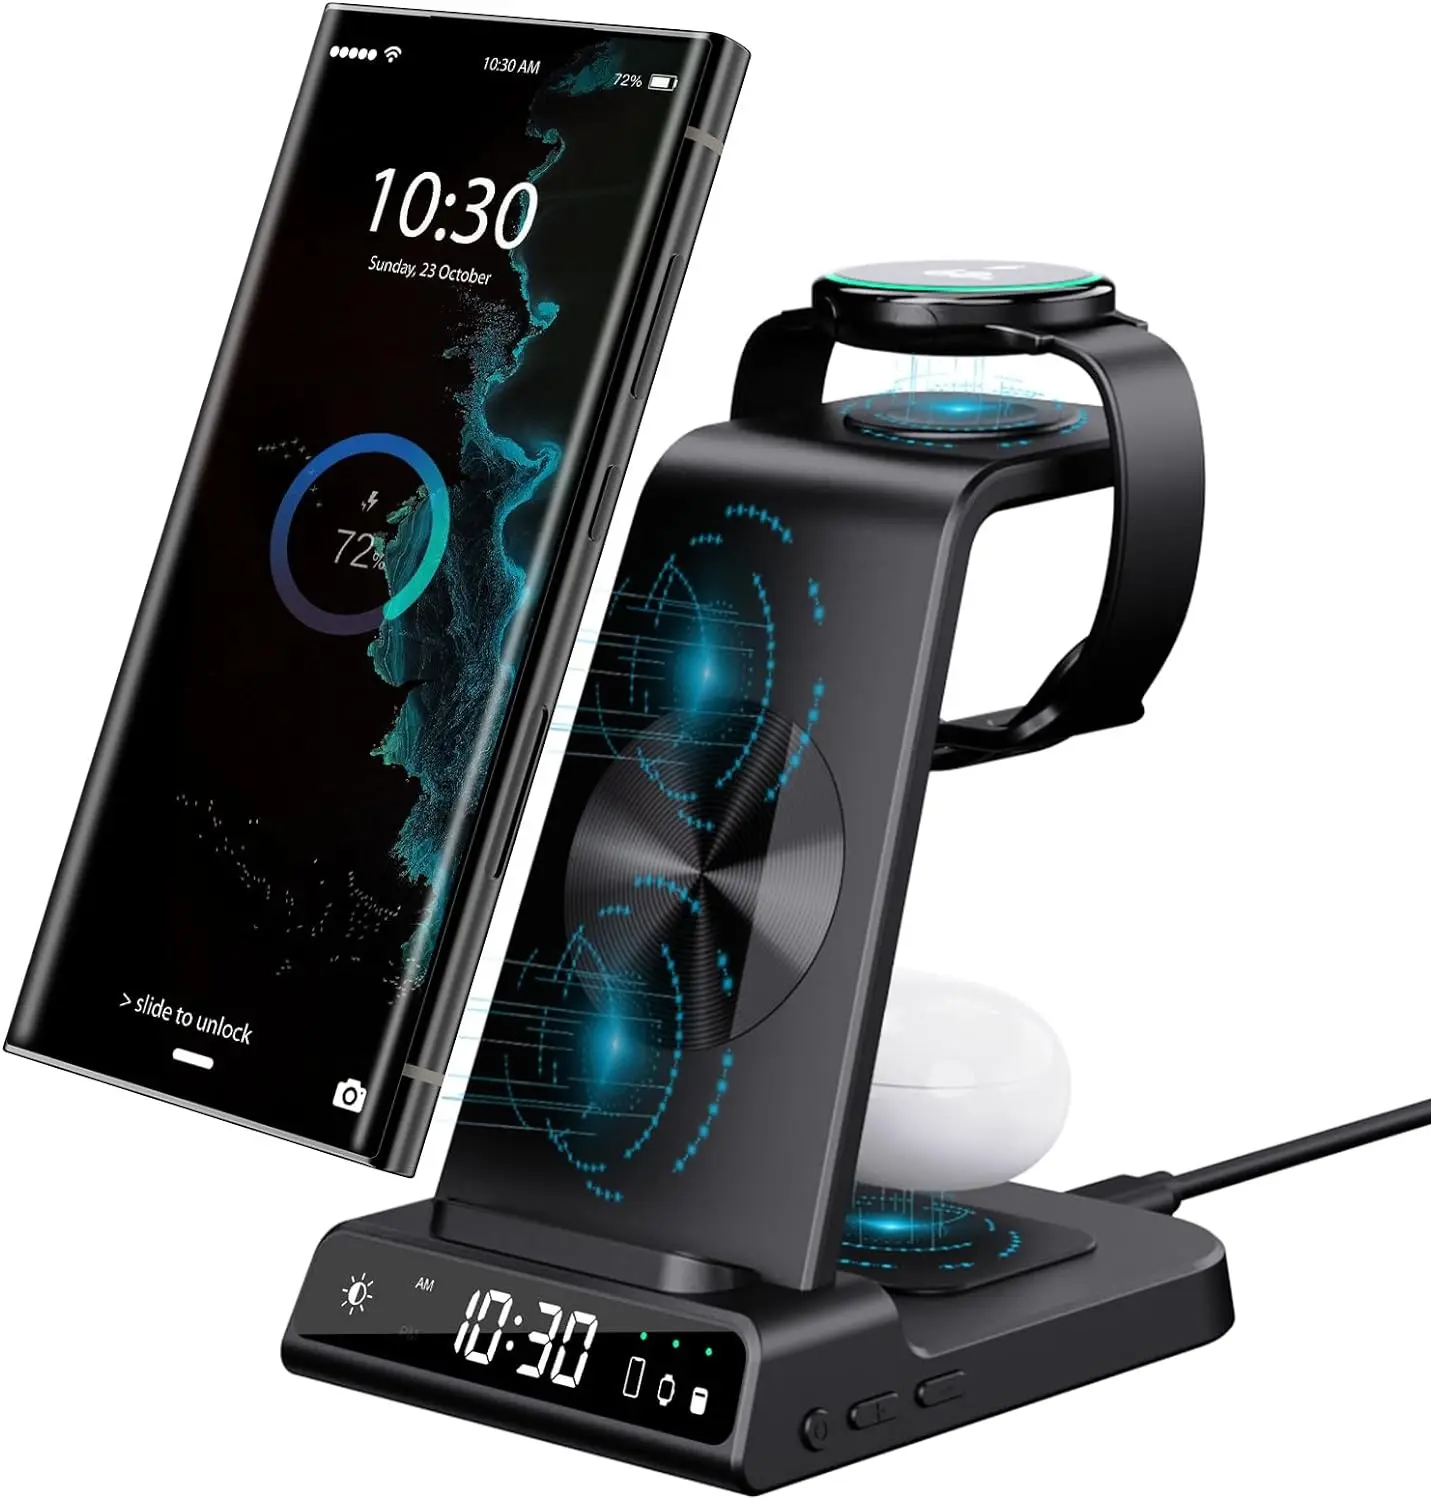 Wireless Charger Charging Station 3 in 1 Android Dock Clock Alarm for Phone and watch and earbuds